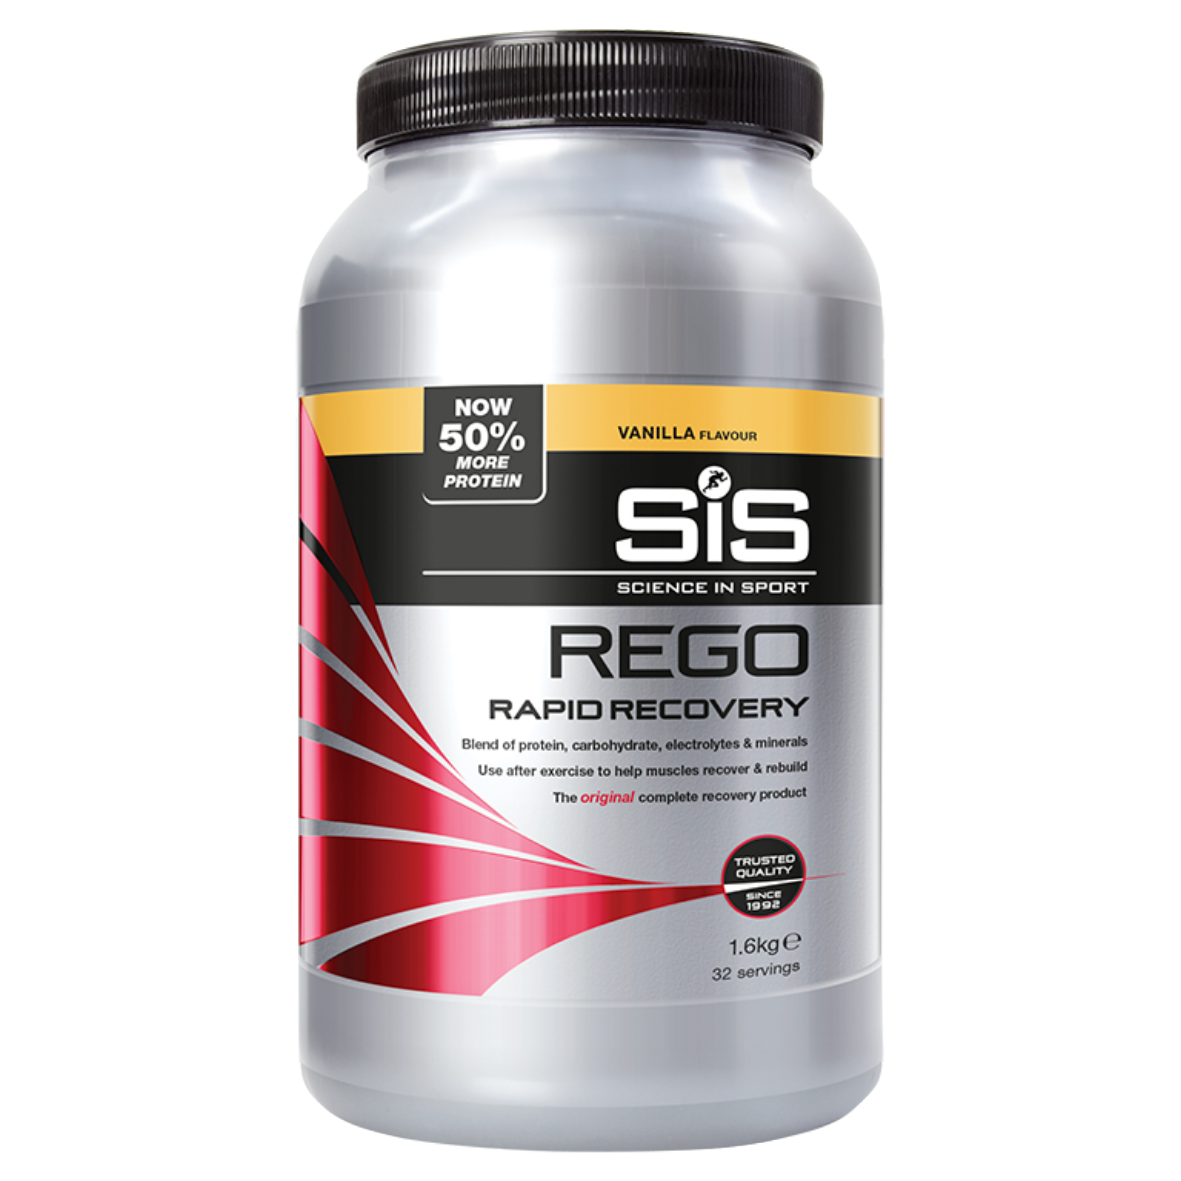 Science in Sport Rego Rapid Recovery Vanilla Protein